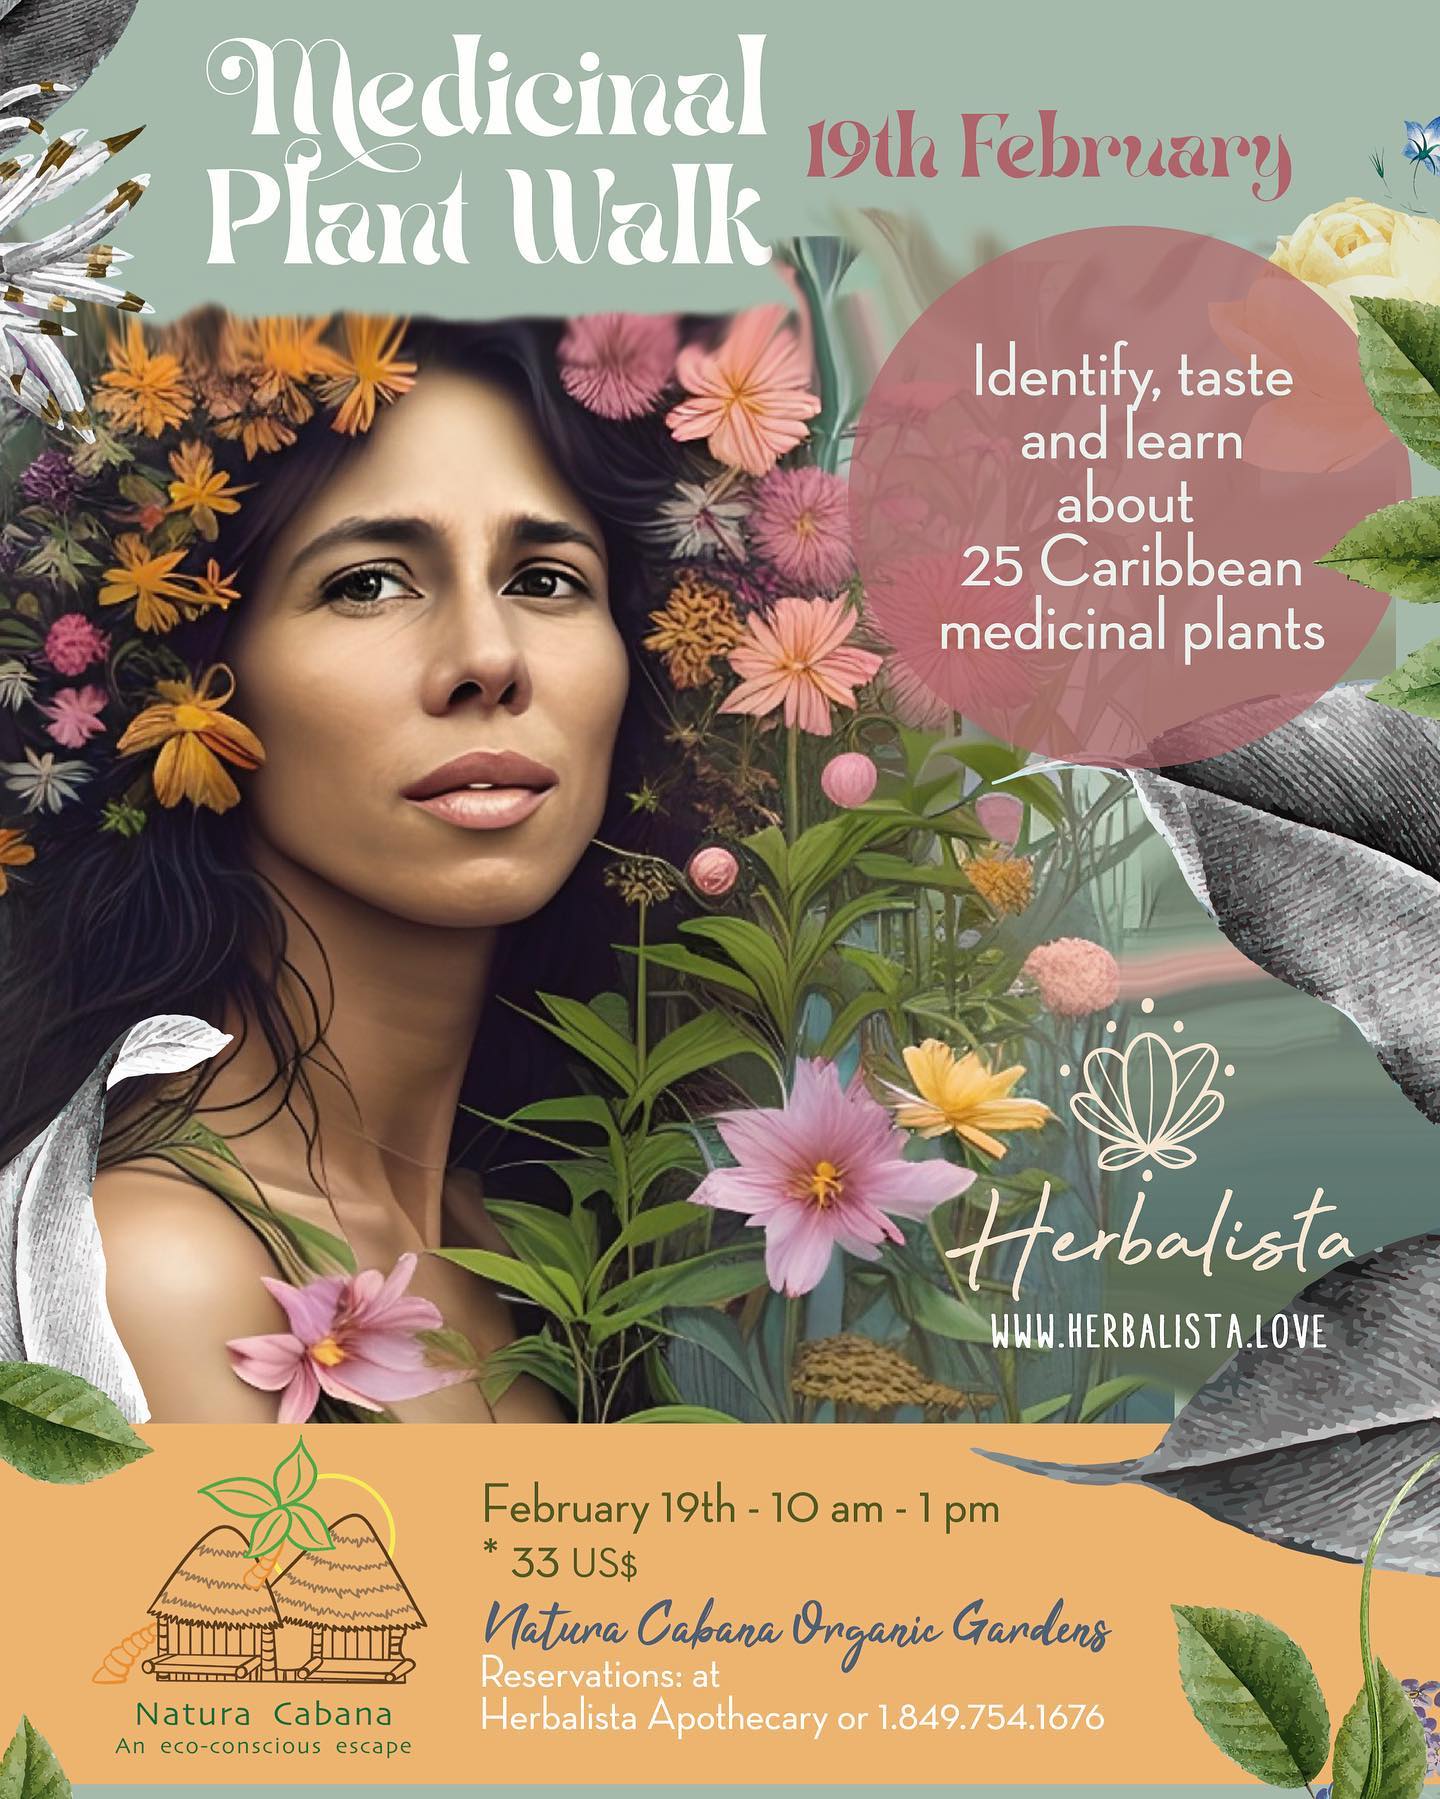 Herbalista annual PLANT WALK

Save this post, save the date and share it with a friend you would want to attend the walk with!

On Sunday the 19 th of February, at 10 am, at Natura Cabana organic gardens, come along with us as we get lost in nature together and learn more about the powerful plants and remedies we can find all around. Healing can be simple and free; connecting with nature can offer us solutions to our ailments and an opportunity to remember our roots. 

During this walk, we will be exploring the nature that surrounds us. We will identify, touch, smell, connect with, and harvest some medicinal plants we can use to support our bodies and minds. After enjoying our little expedition, the sun, the earth beneath our feet, and the air, we’ll go into detail about what we’ve harvested. We’ll answer your questions and even make an infusion from the plants of your choice, so you can see for yourself ways to incorporate these natural remedies into your daily routine. 

You’ll leave with a printed document for reference so you can use what you’ve learned once you’re back at home. 

 This workshop will be $33 USD for about 2 and half hours of exploration and learning. 
Watch this reel to give you a preview of this experience: https://www.instagram.com/reel/CZ7GvoLrPCY/?igshid=YmMyMTA2M2Y=

Saturday 19th February, 10 am to 1 pm
@Natura Cabana organic gardens
33us$ per person 

Spots are limited so reserve your space at Herbalista apothecary or by privately replying to this message.